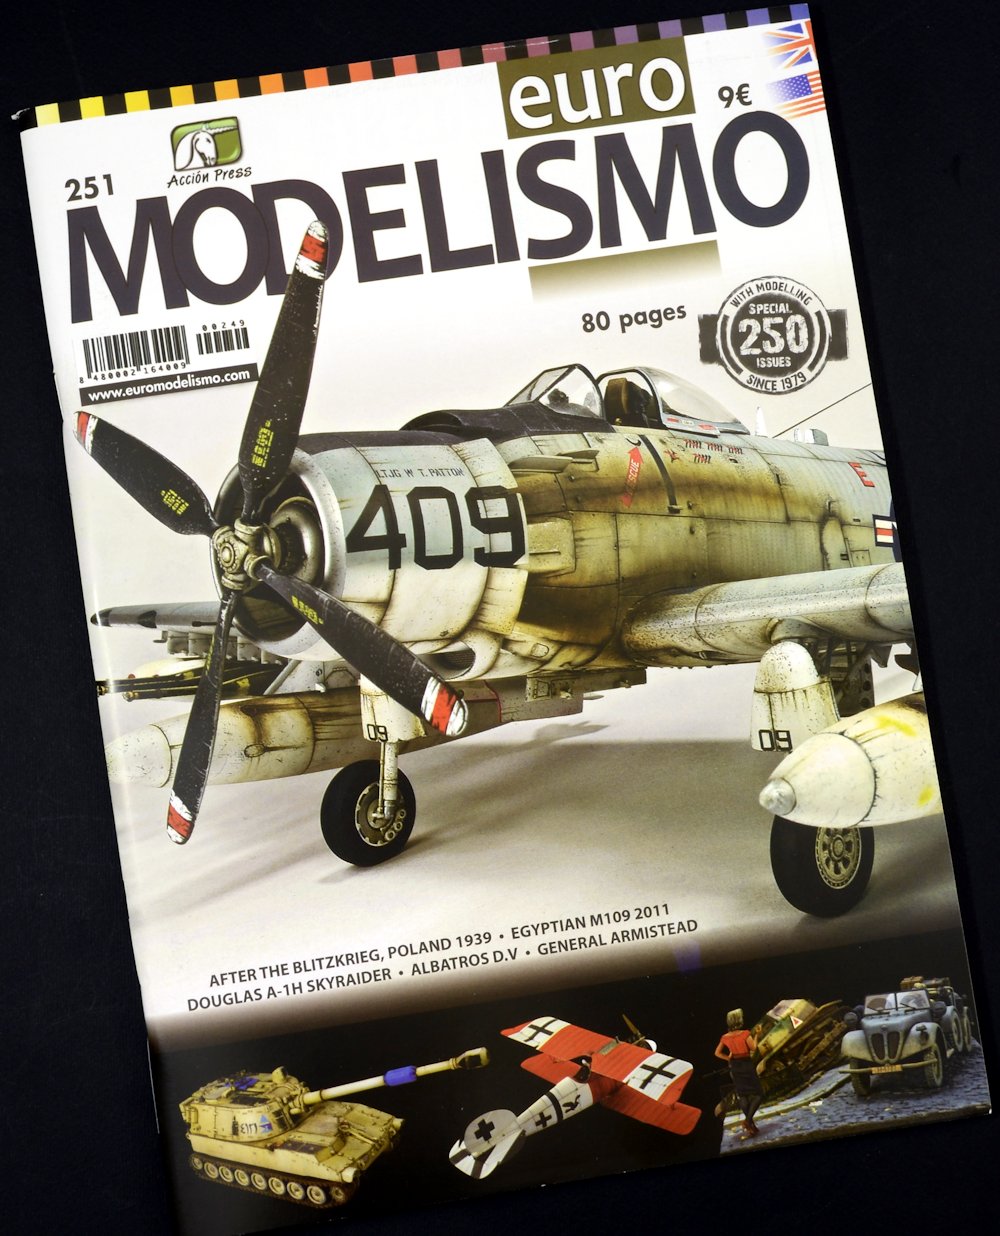 The Modelling News: Review: Euromodelismo #251 review - The special Birthday English edition